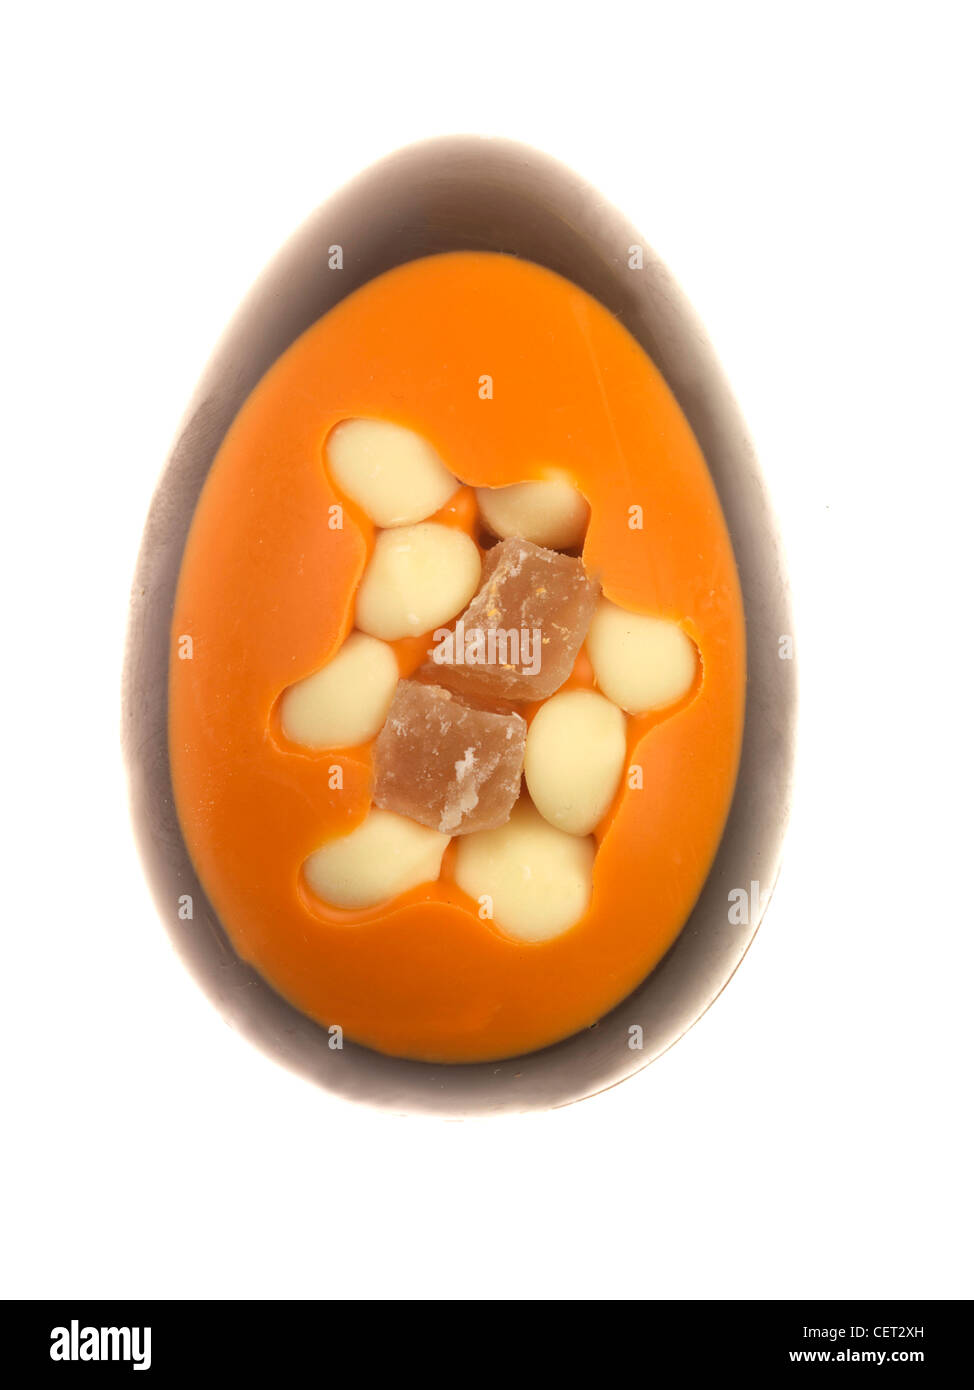 Traditional Luxury Novelty Chocolate Easter Egg Confectionery, Isolated Against White Background, With Clipping Path And No People, Ready To Eat Stock Photo